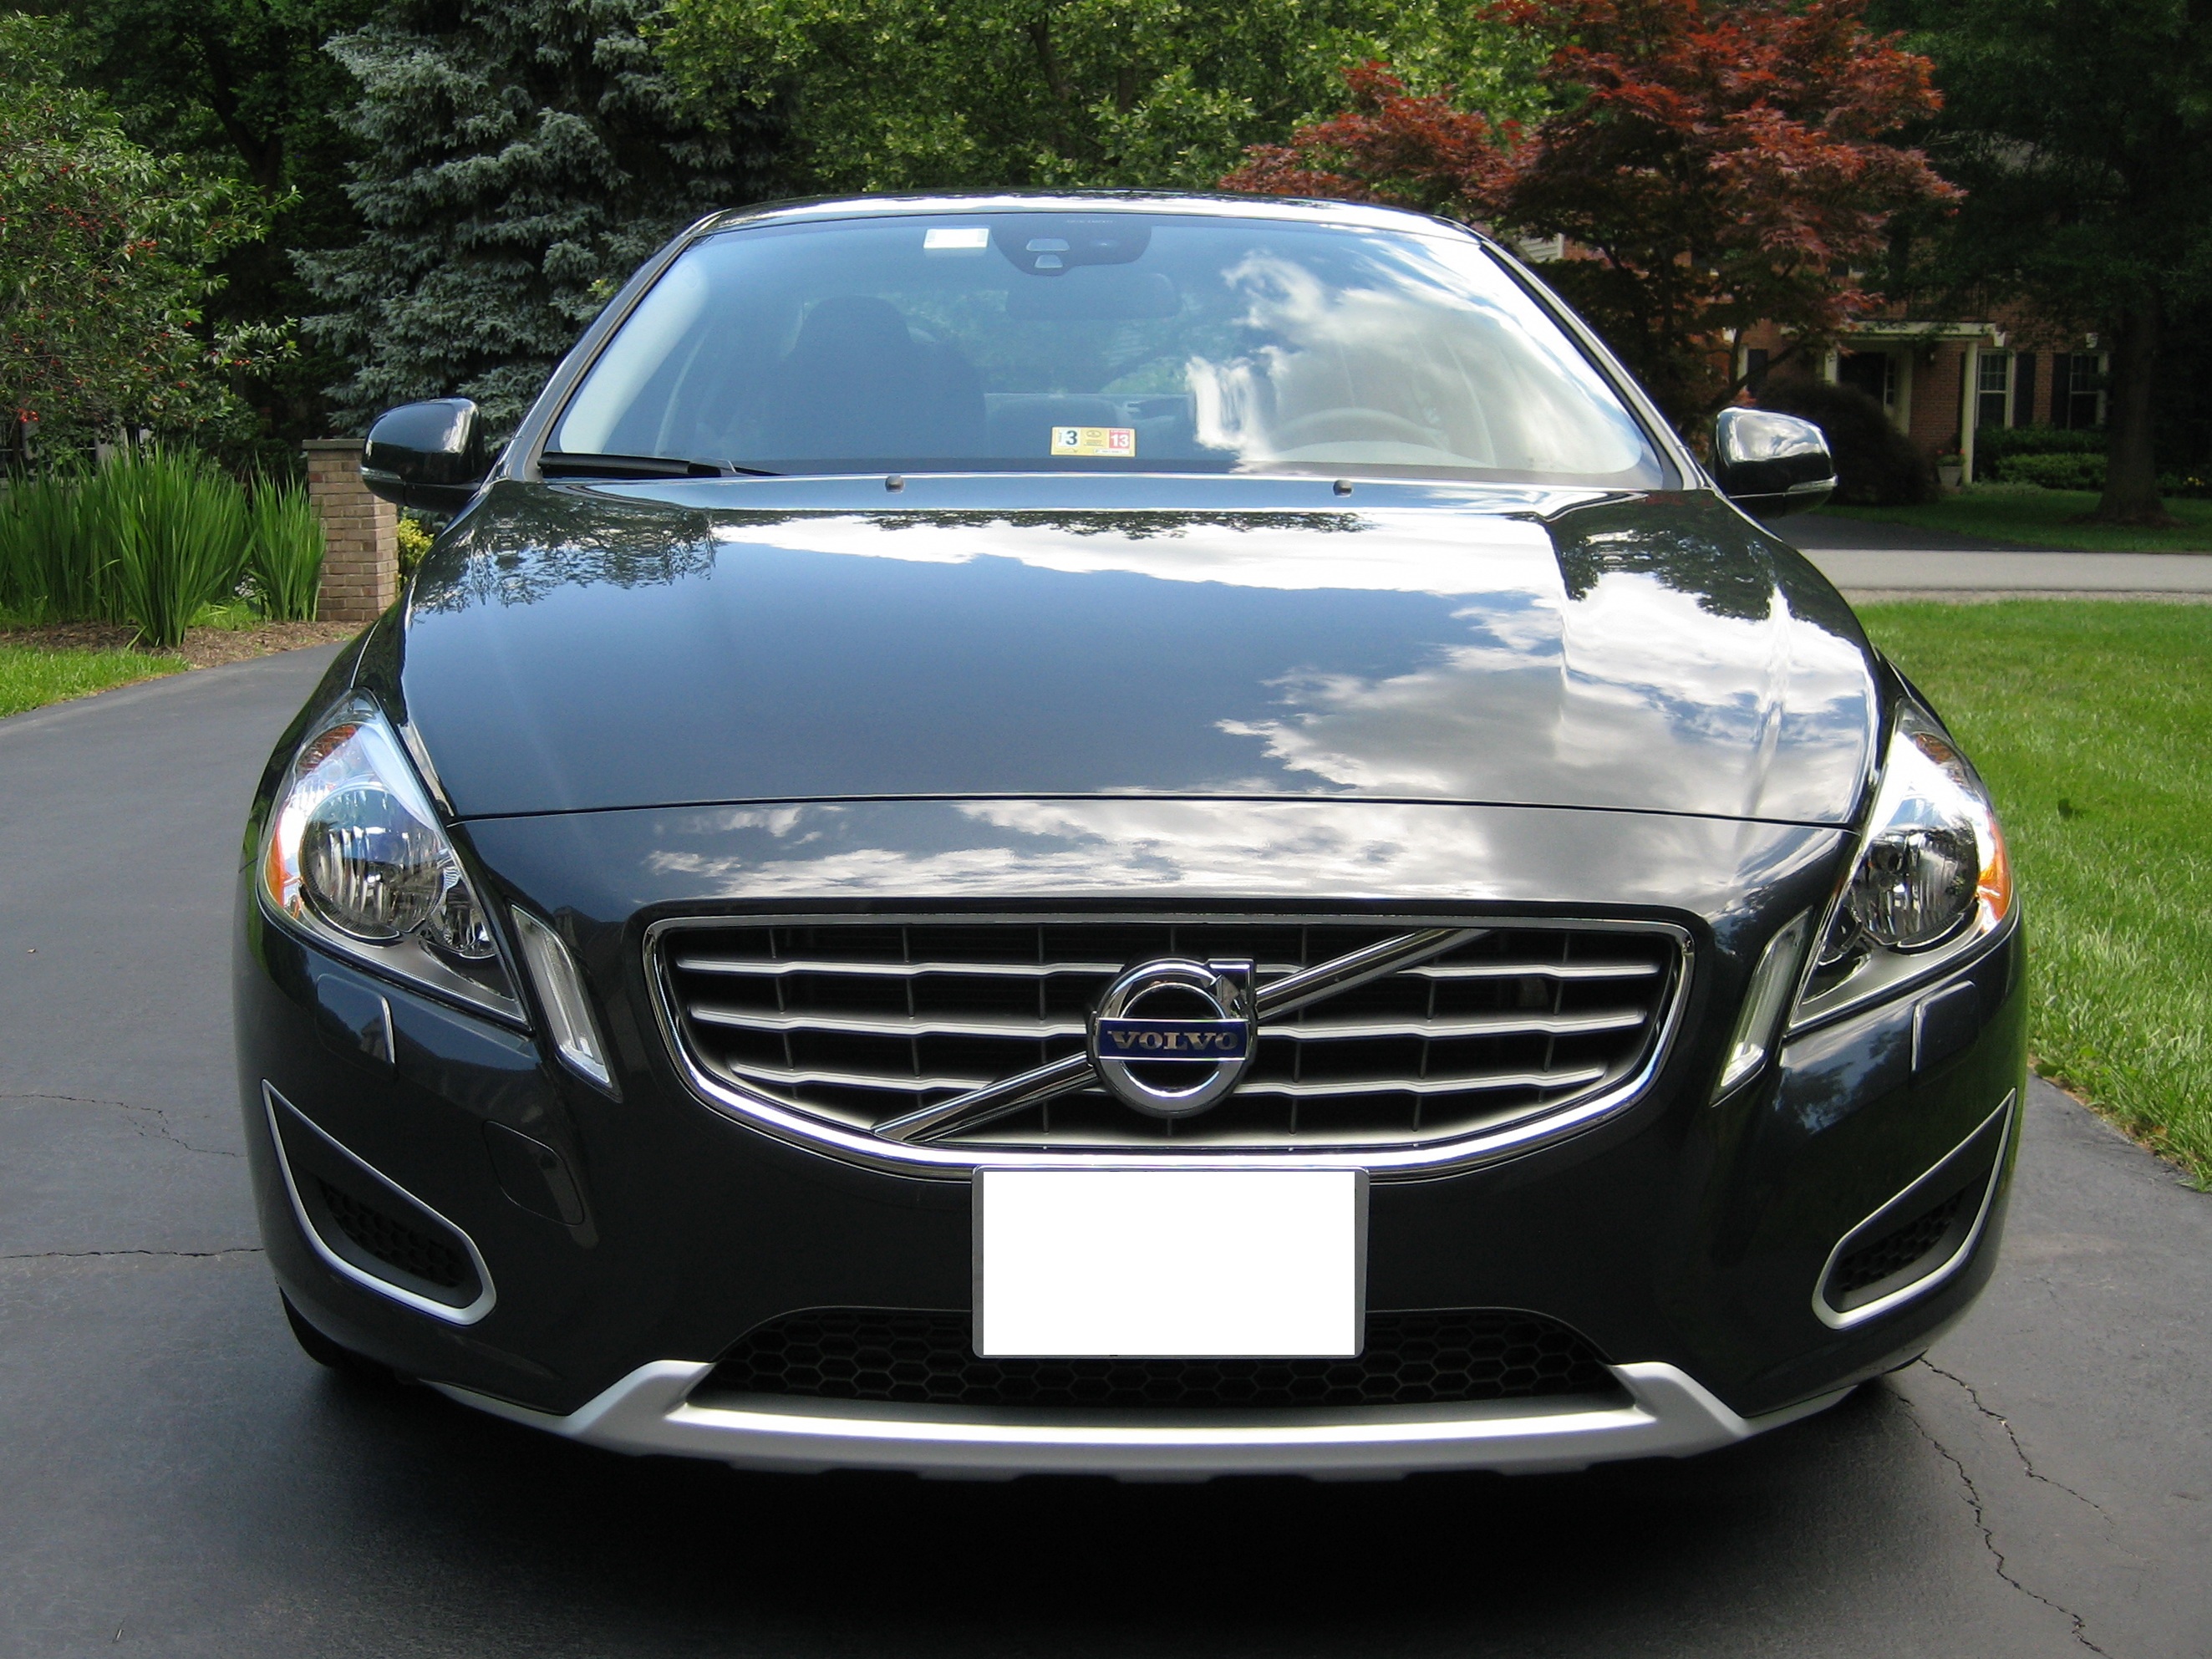 The Wall Ursus' 2012 Volvo S60 T5 RIDE with G